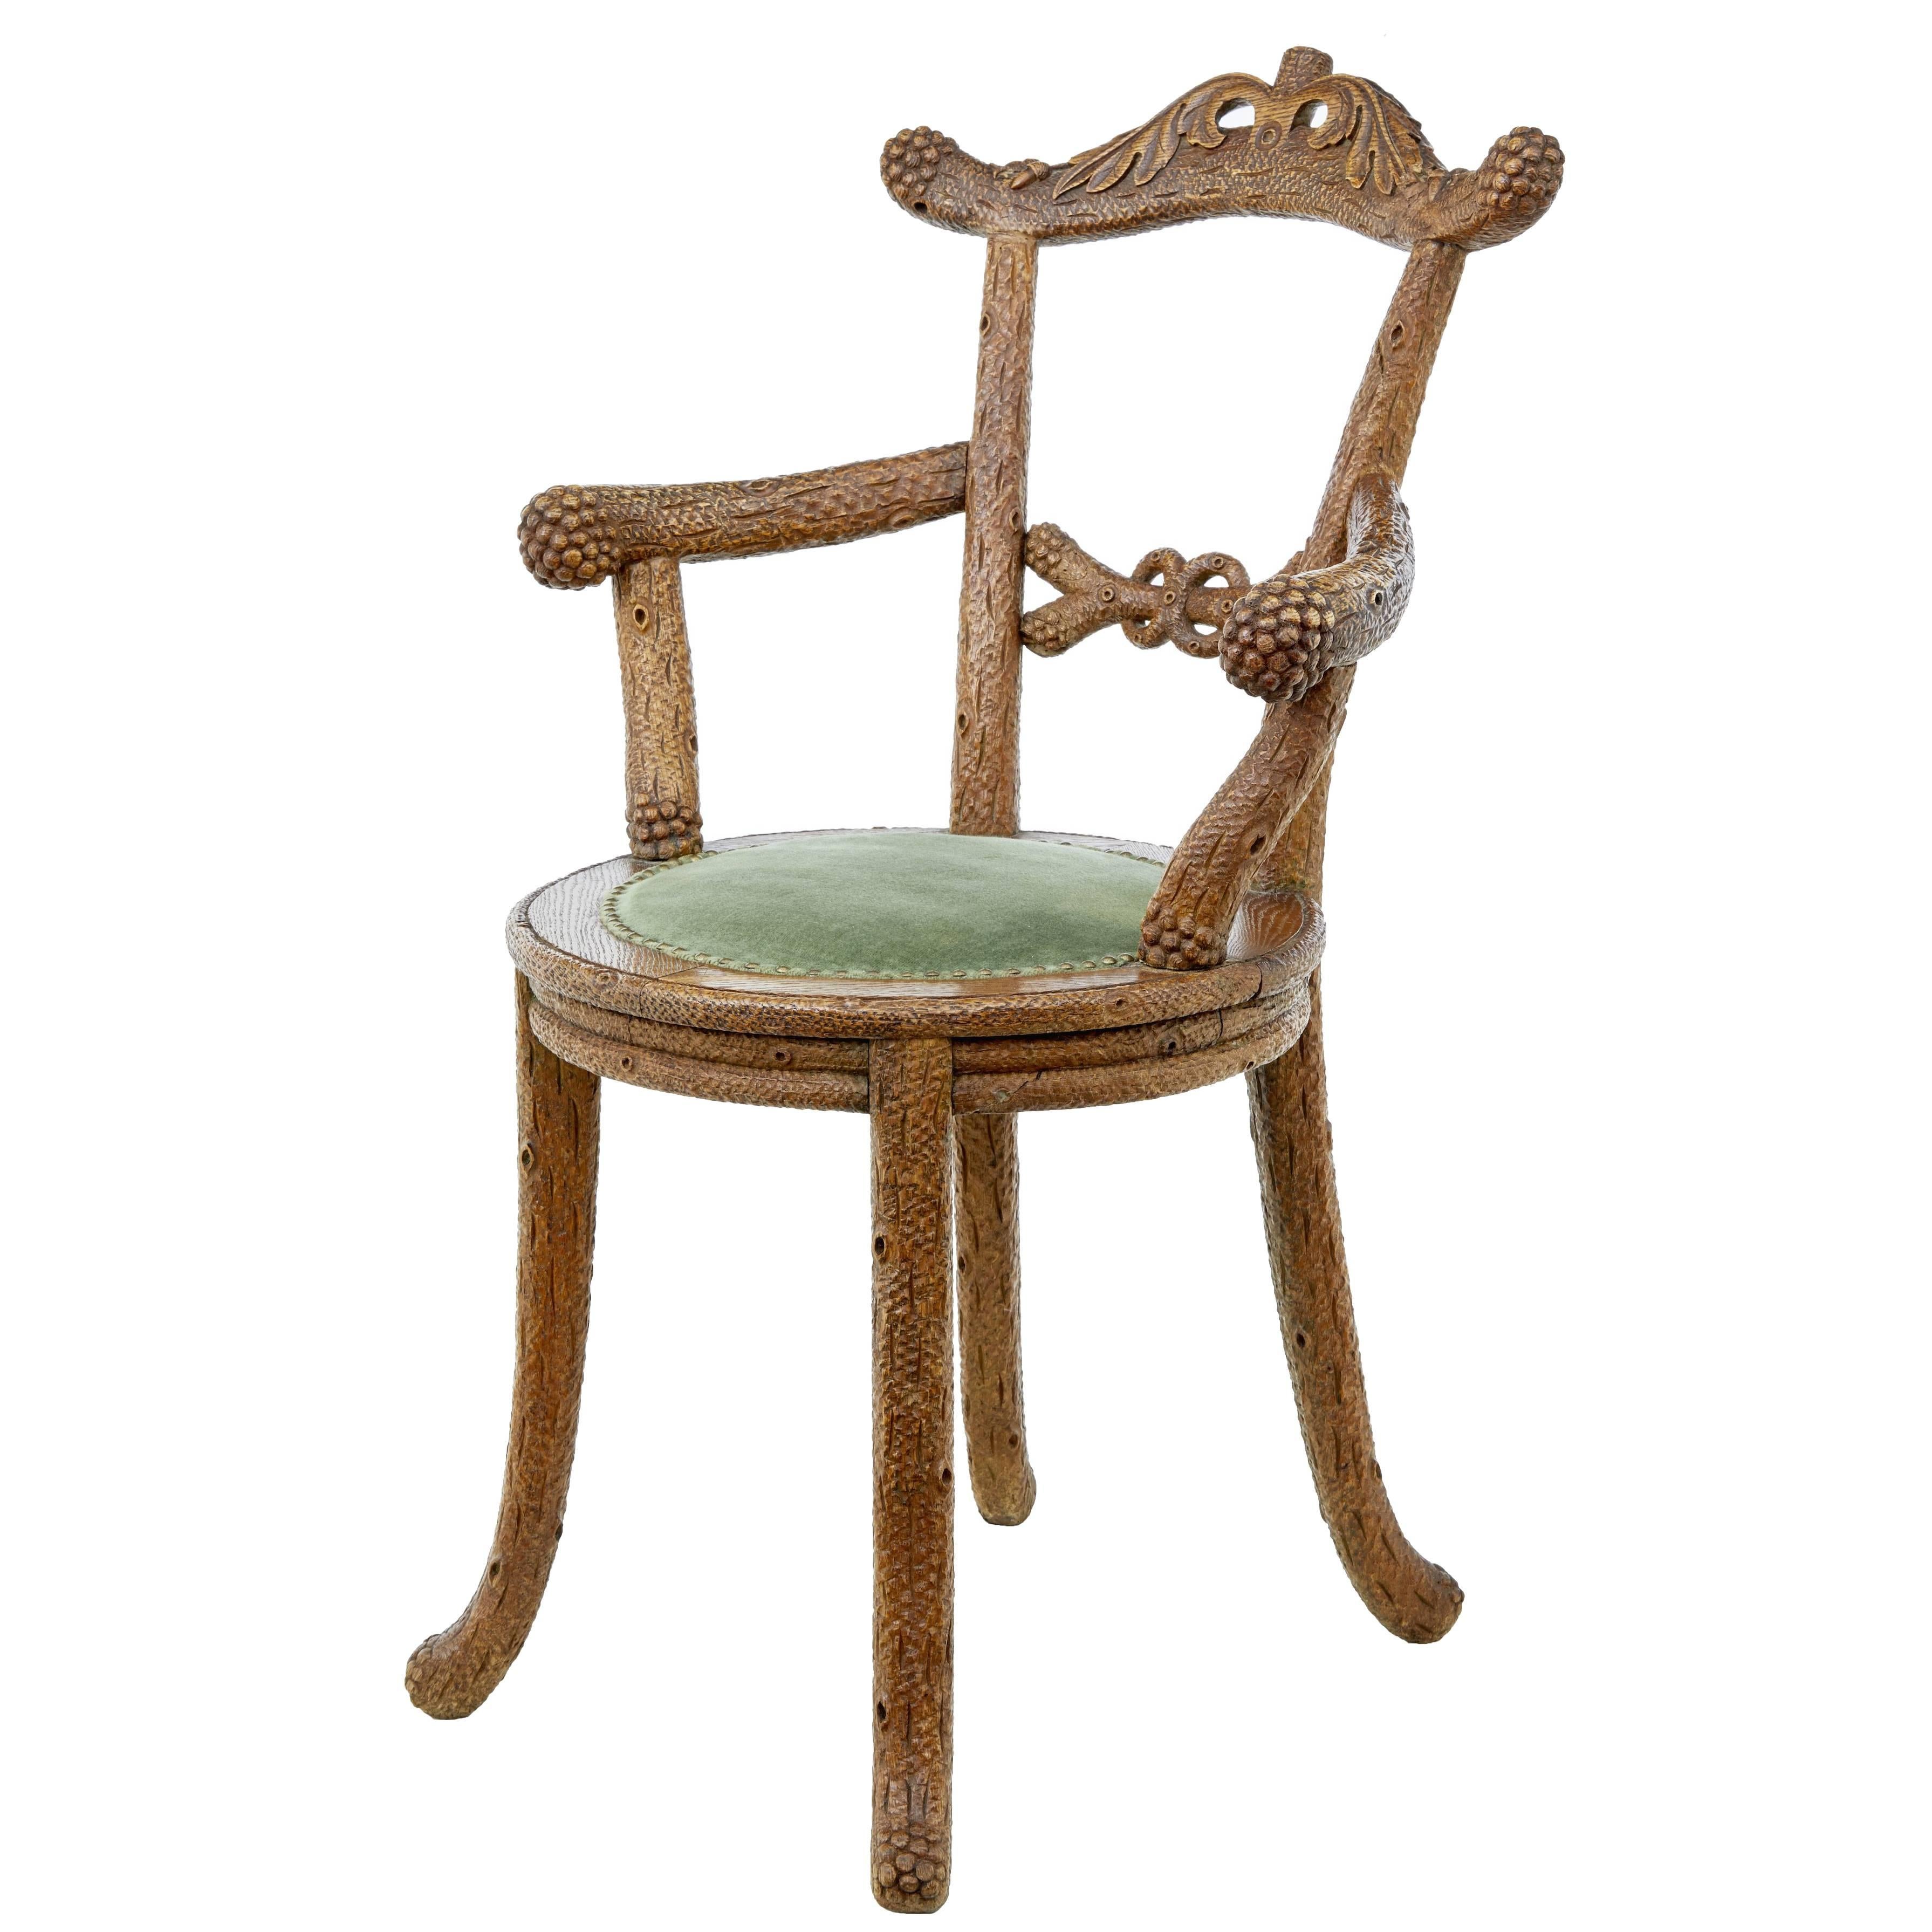 19th Century Carved Oak Black Forest Armchair